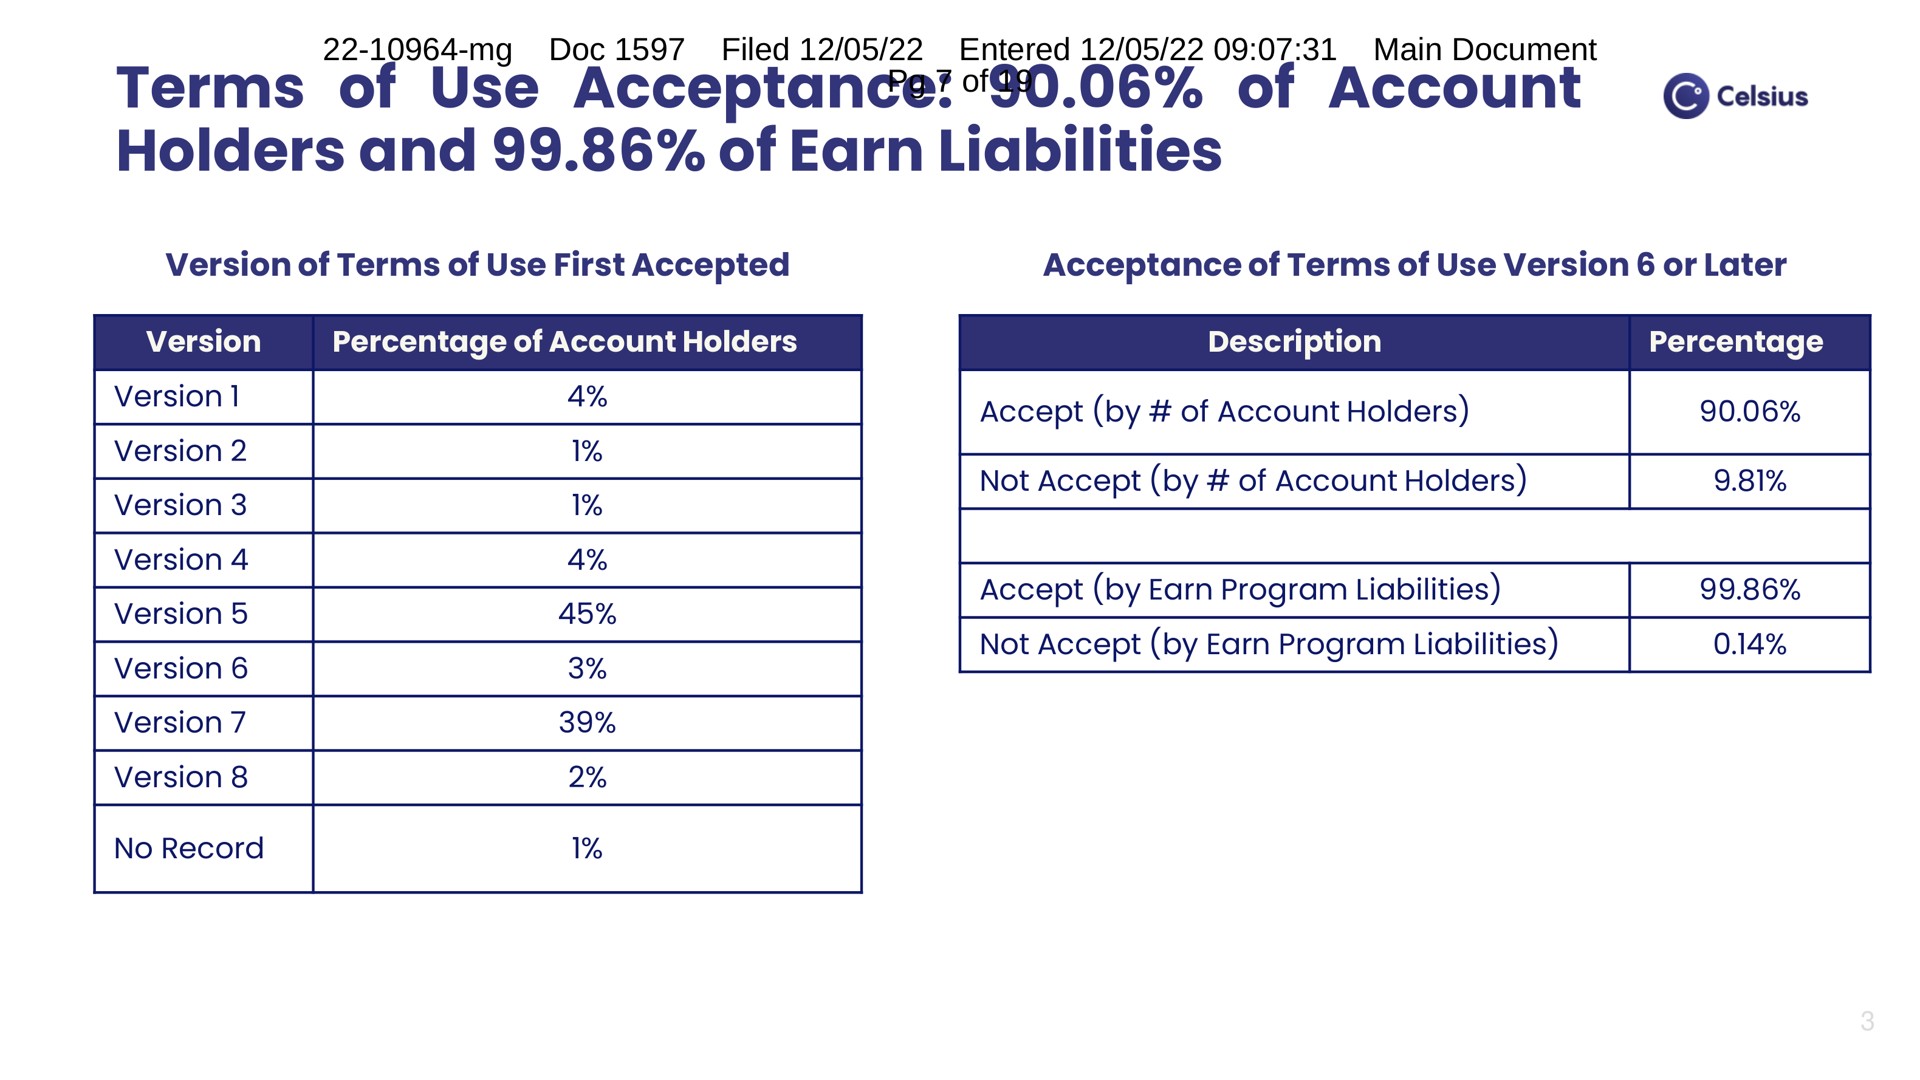 terms of use acceptance of account holders and of earn liabilities | Celsius Network